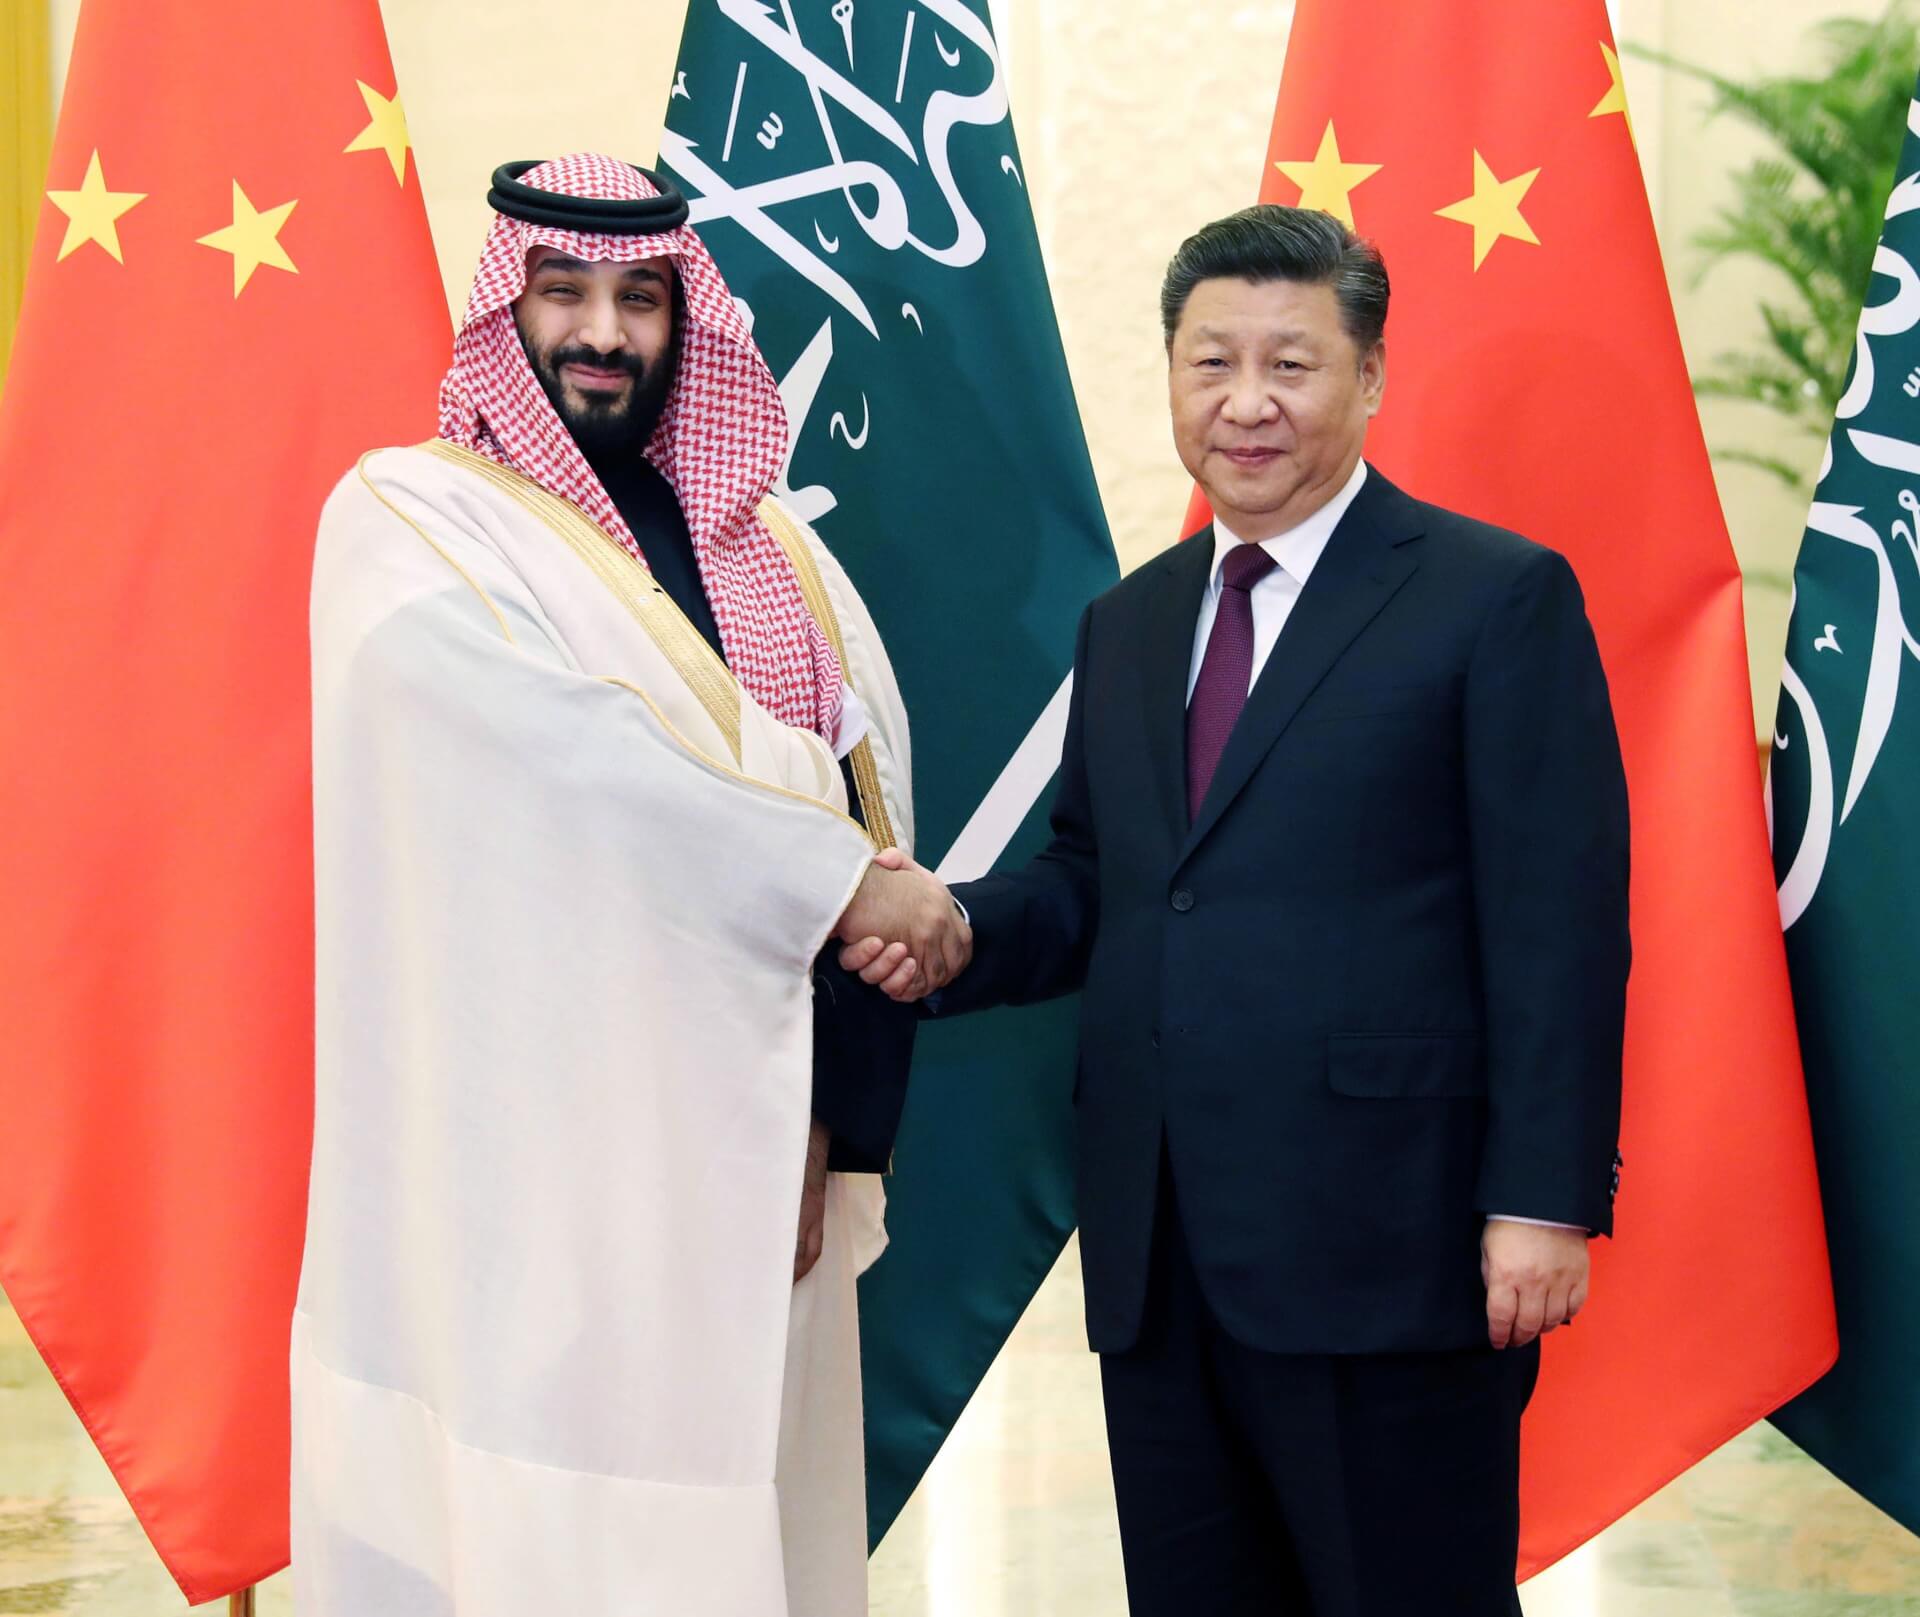 Saudi Arabia Manufacturing Ballistic Missiles With Chinese Help: US Intelligence